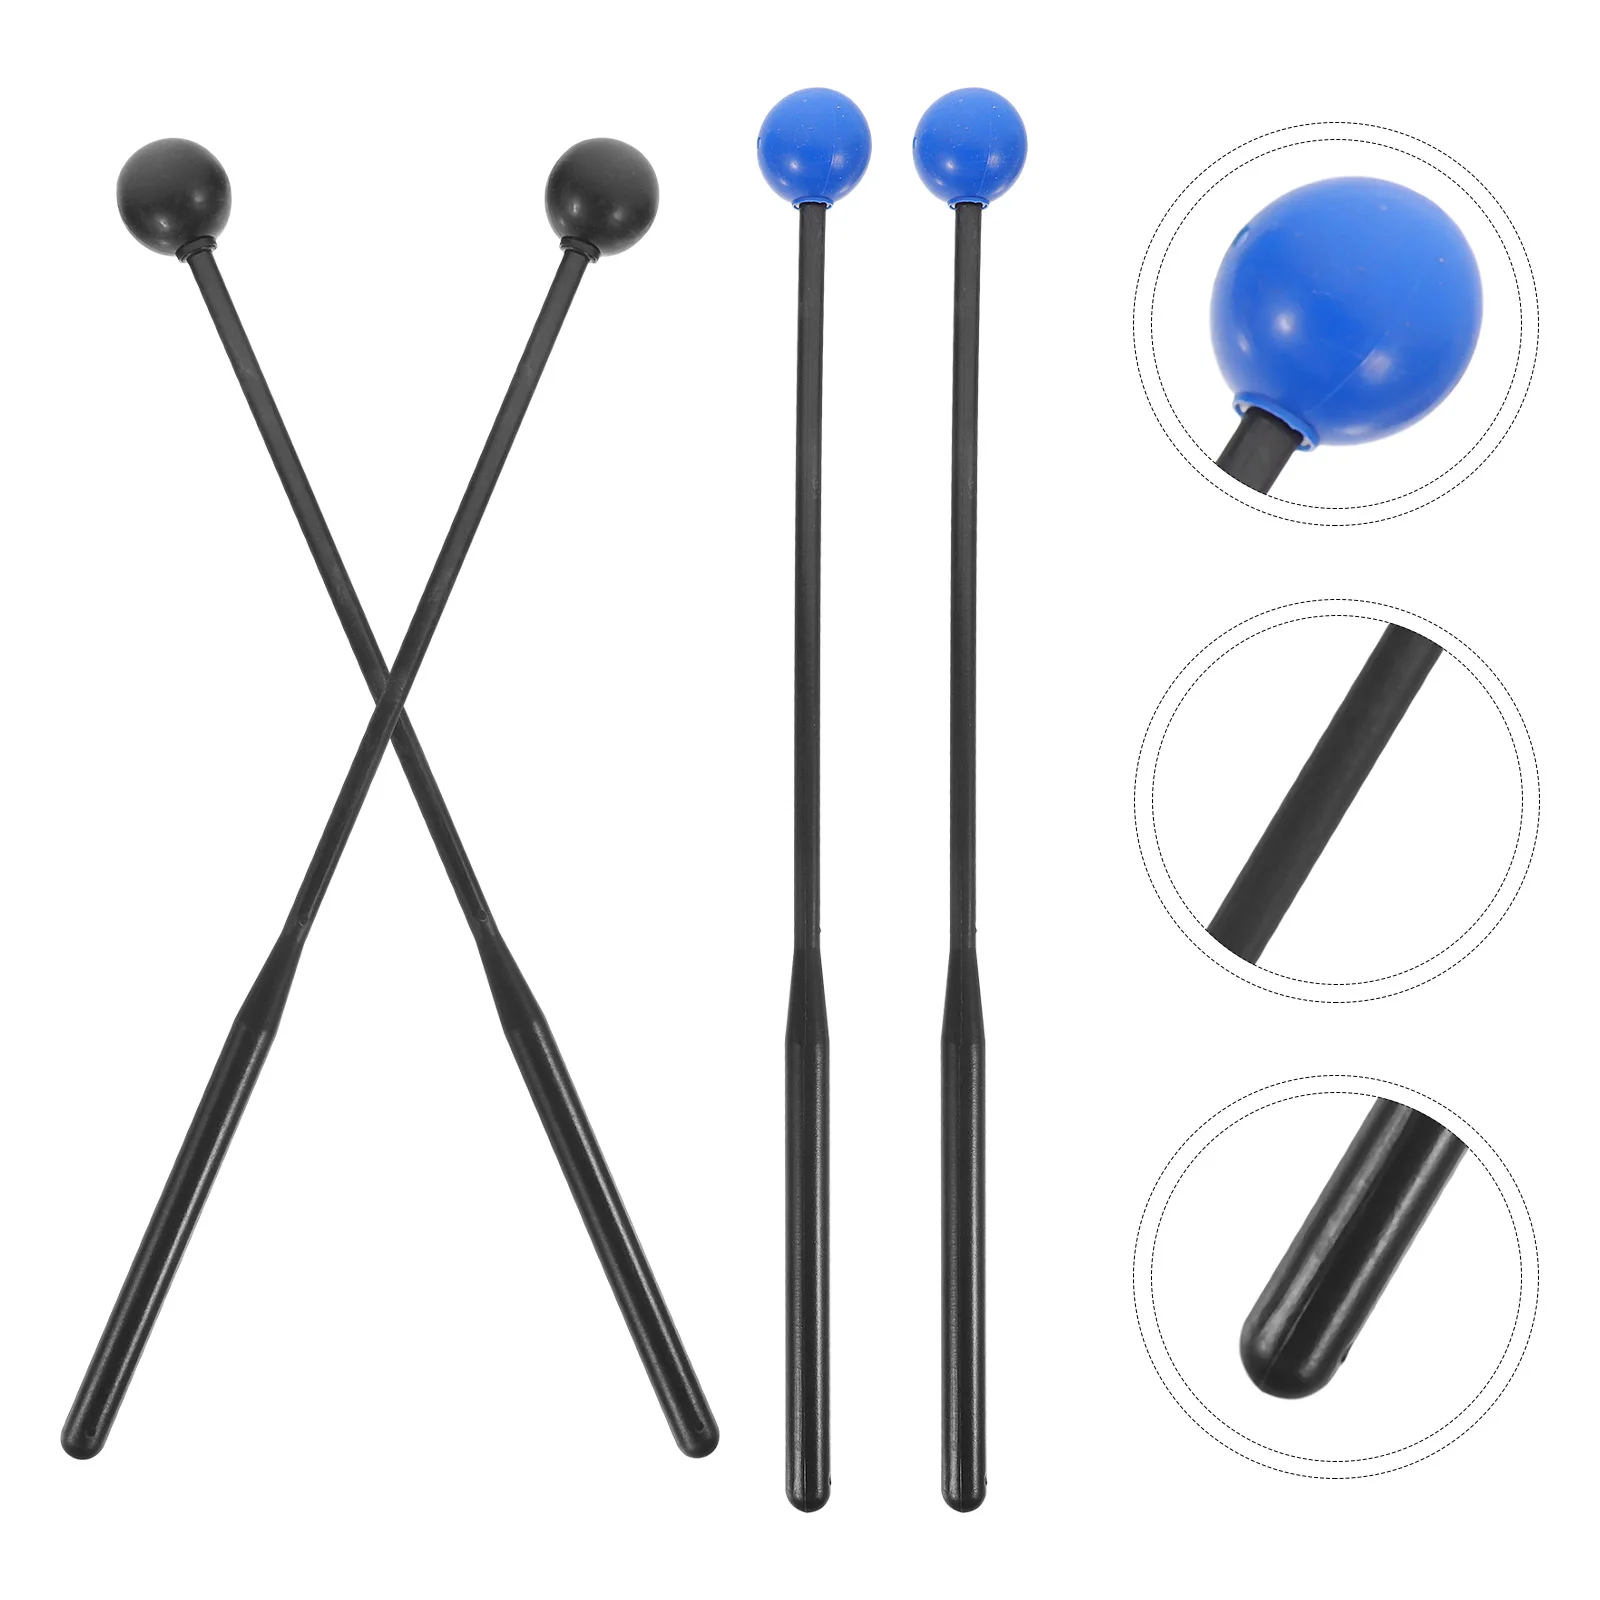 tongue drum 6 inch steel 8 tones ethereal hand pan drum with 2 mallets storage drum bag drumsticks musical instrument Tongue Drum Drumstick Percussion Instrument Mallets Marimba Drumsticks Practice Mallets for Beginners